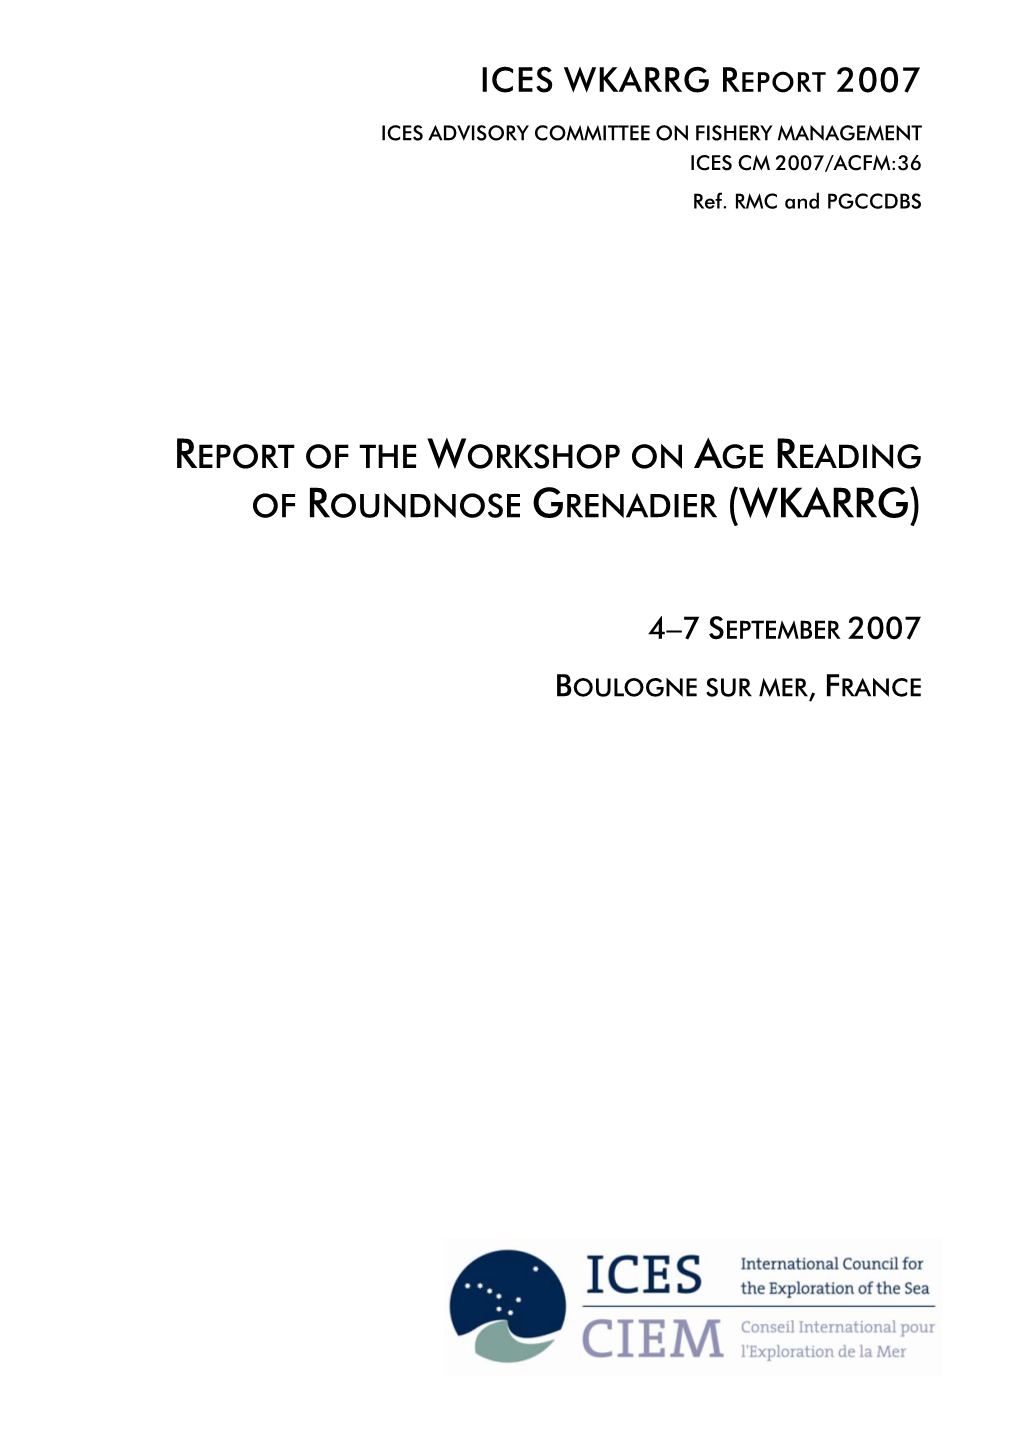 Report of a Workshop on Age Reading of Roundnose